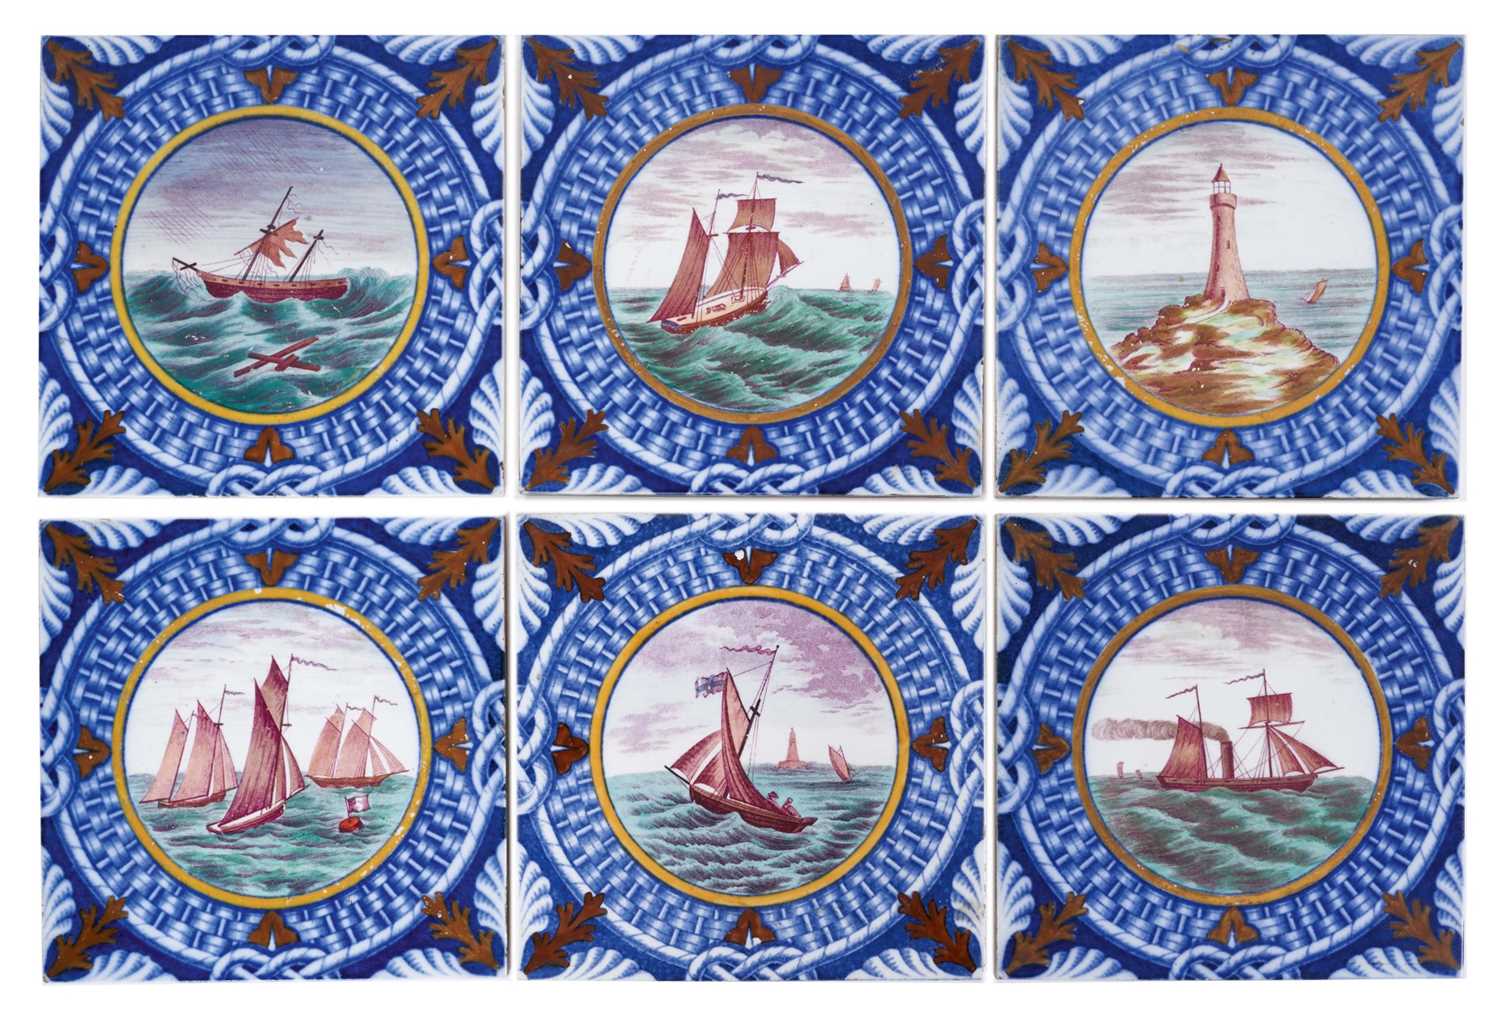 Lot 37 - Six Victorian Minton & Hollins tiles, polychrome printed with boats and a lighthouse, within a rope, shell and seaweed border